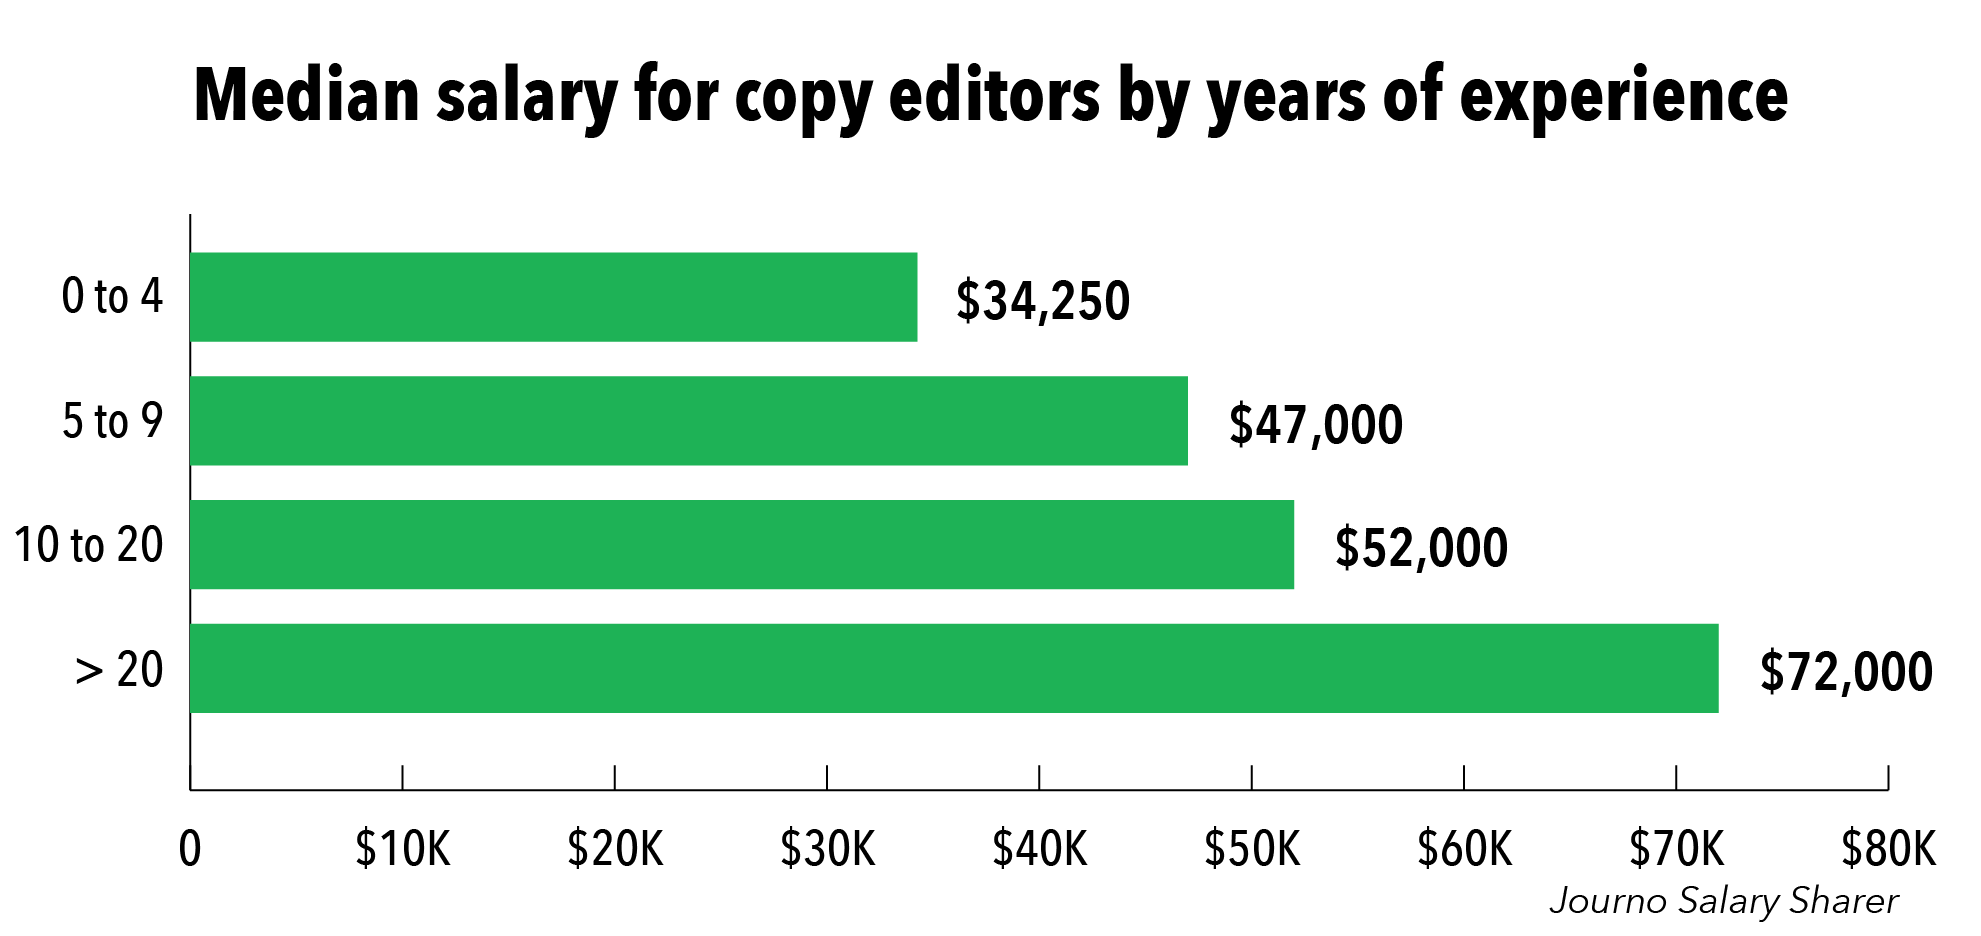 Journo Salary Sharer How Much Do Copy Editors Make By Julia Haslanger Journo Salary Sharer 4349